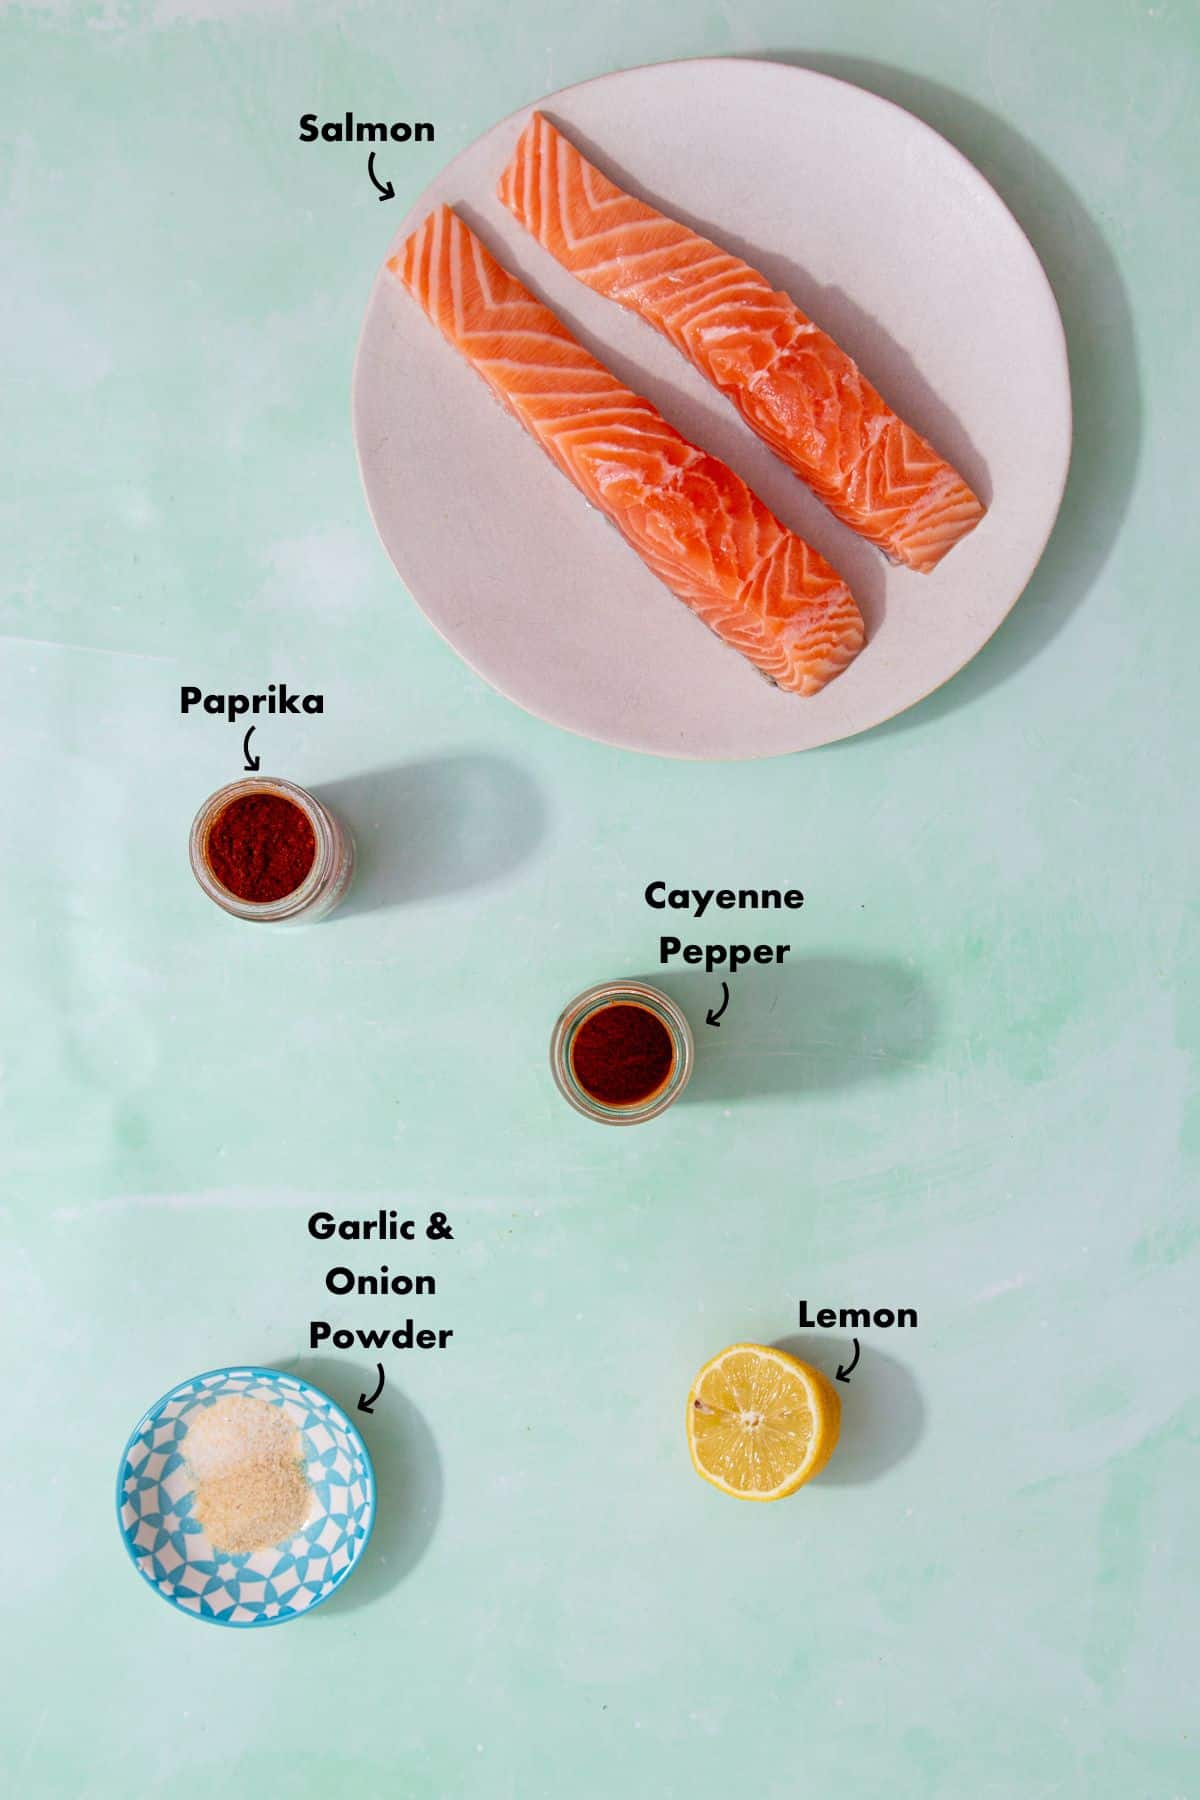 A pieces of raw salmon on a white plate with other ingredients laid out on a pale blue background and labelled.